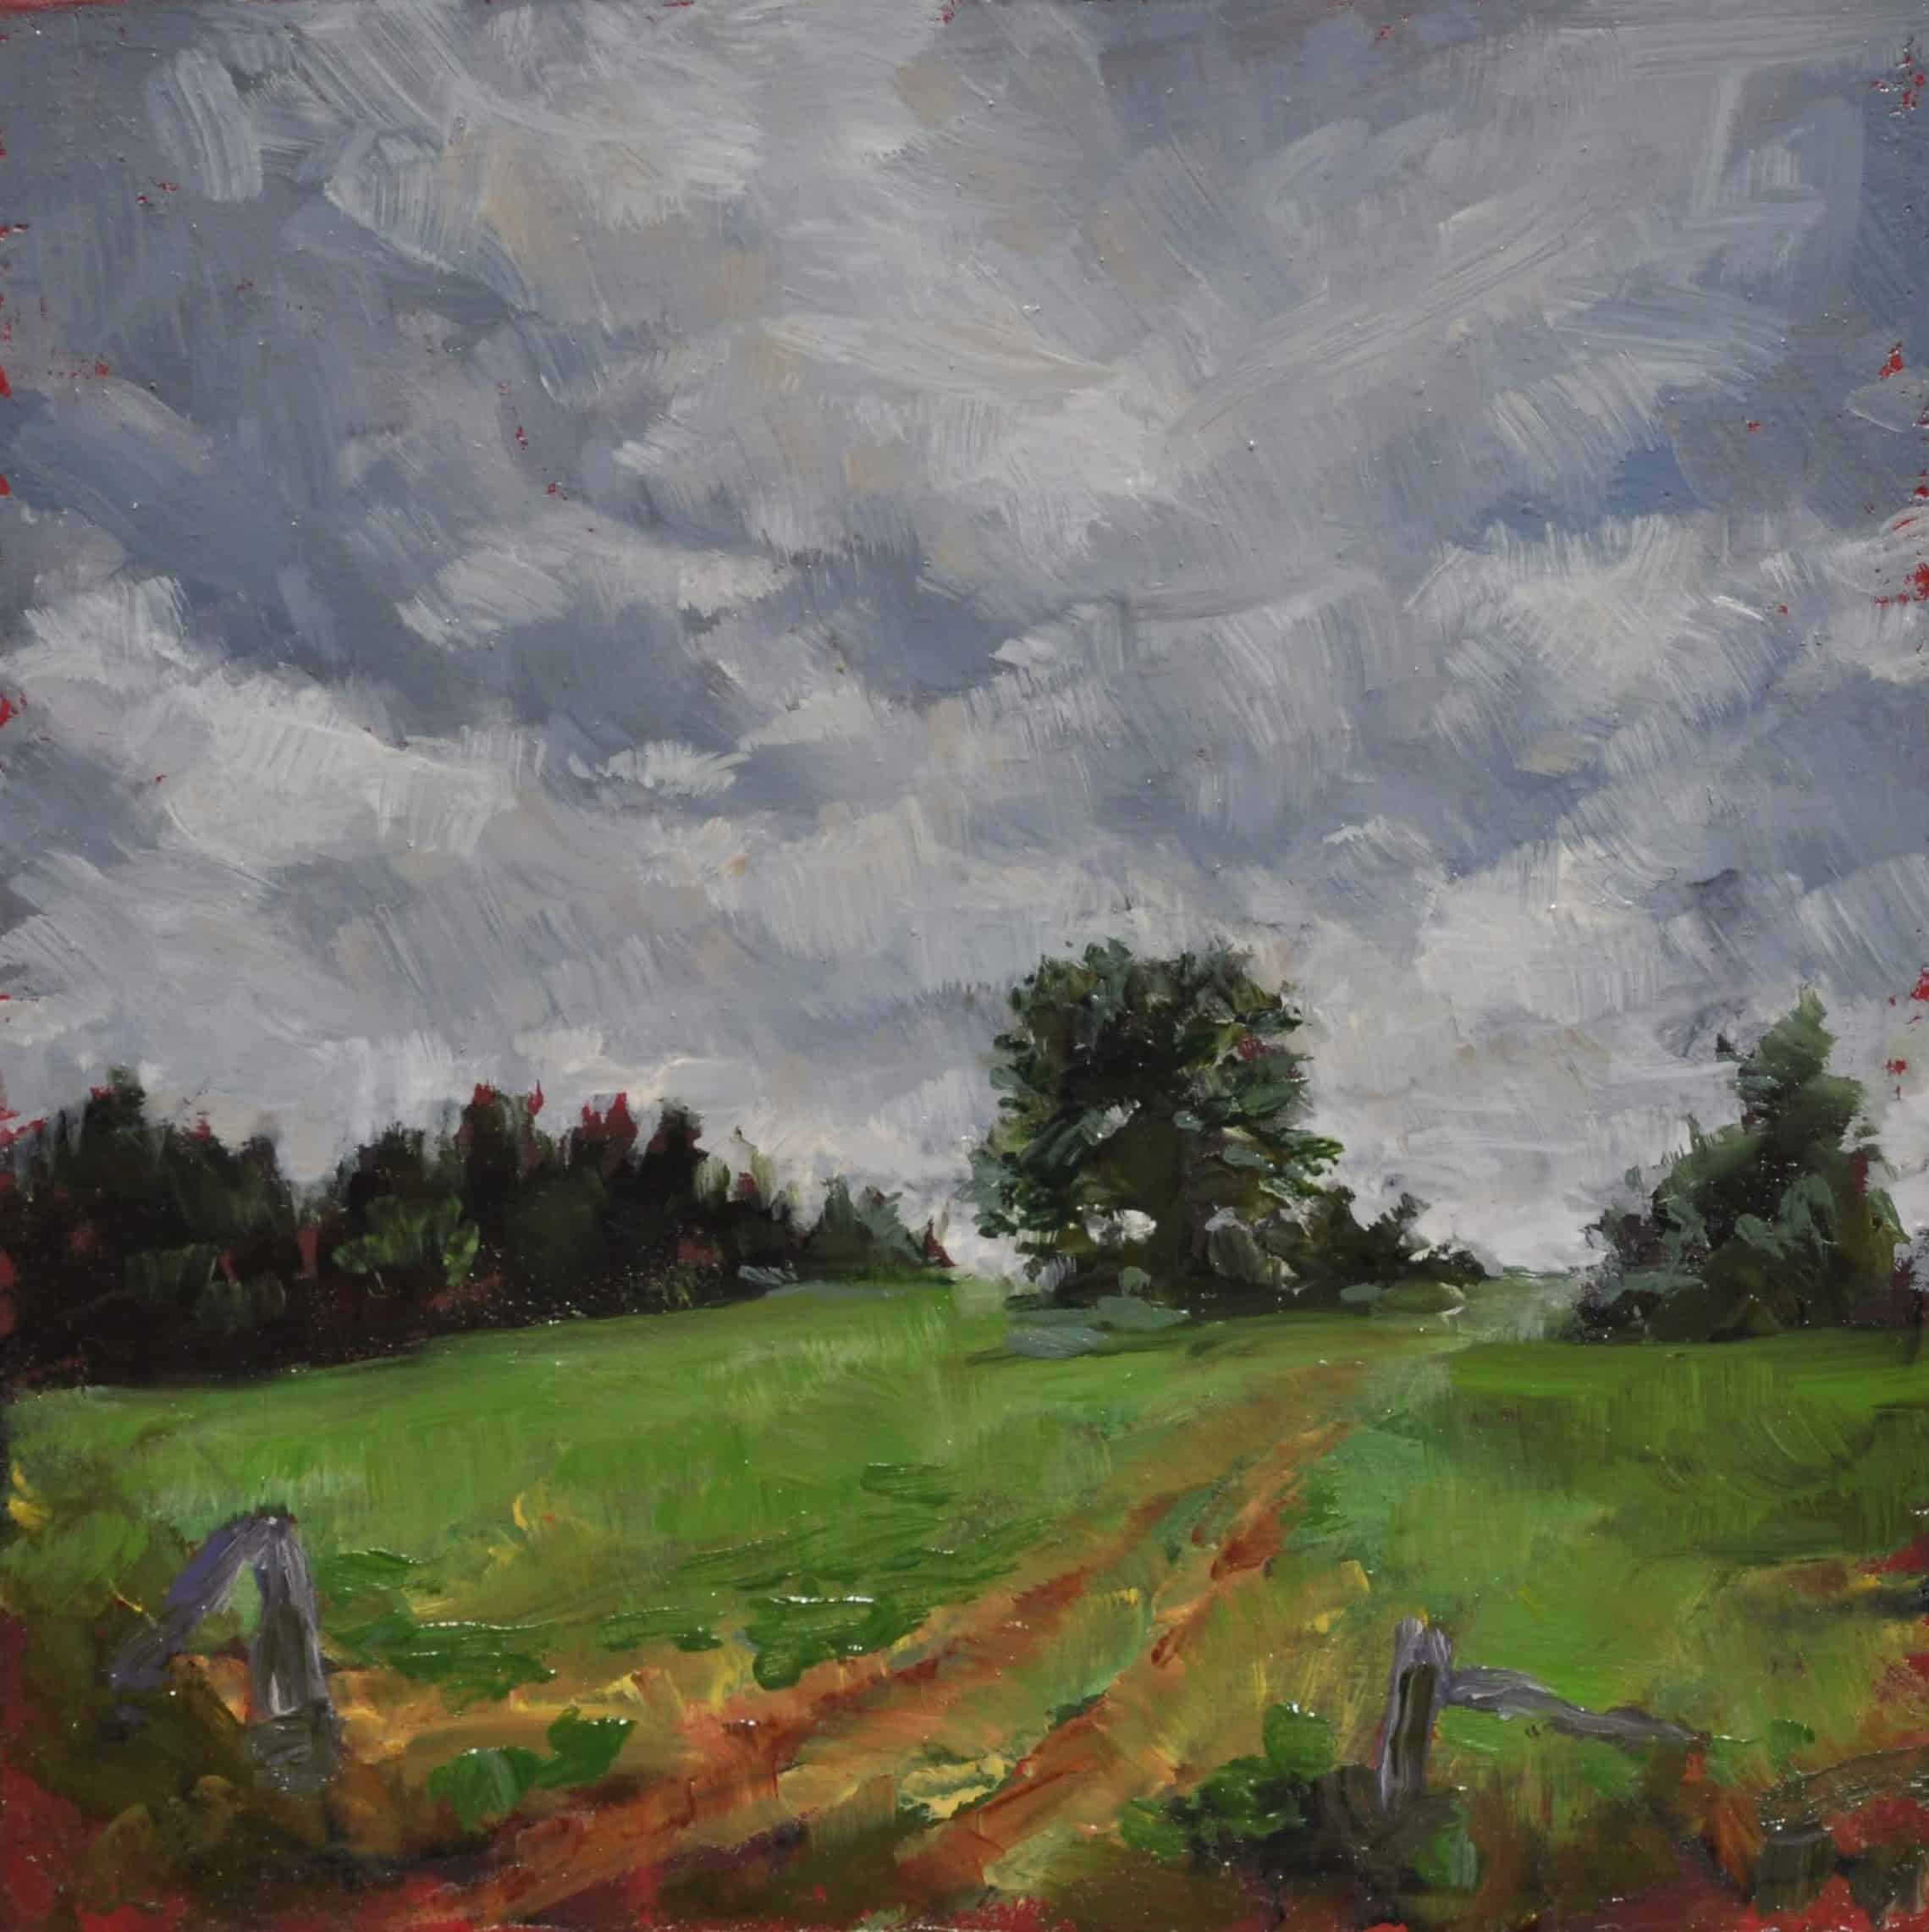 Kim Aerts oil painting - Overcast Field, Sussex - 4x4 inches